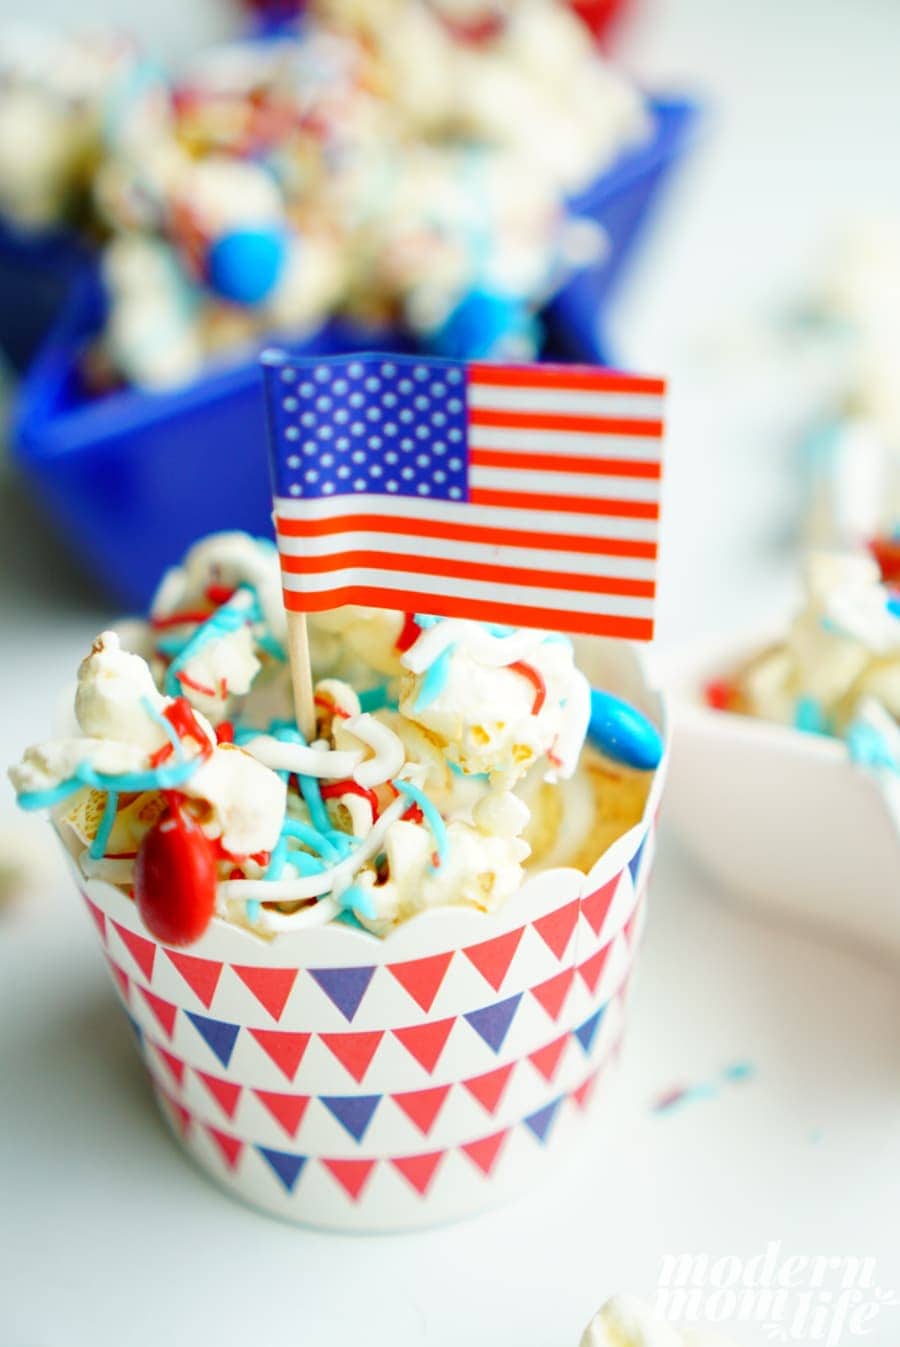 Delicious 4th of July Food Recipes